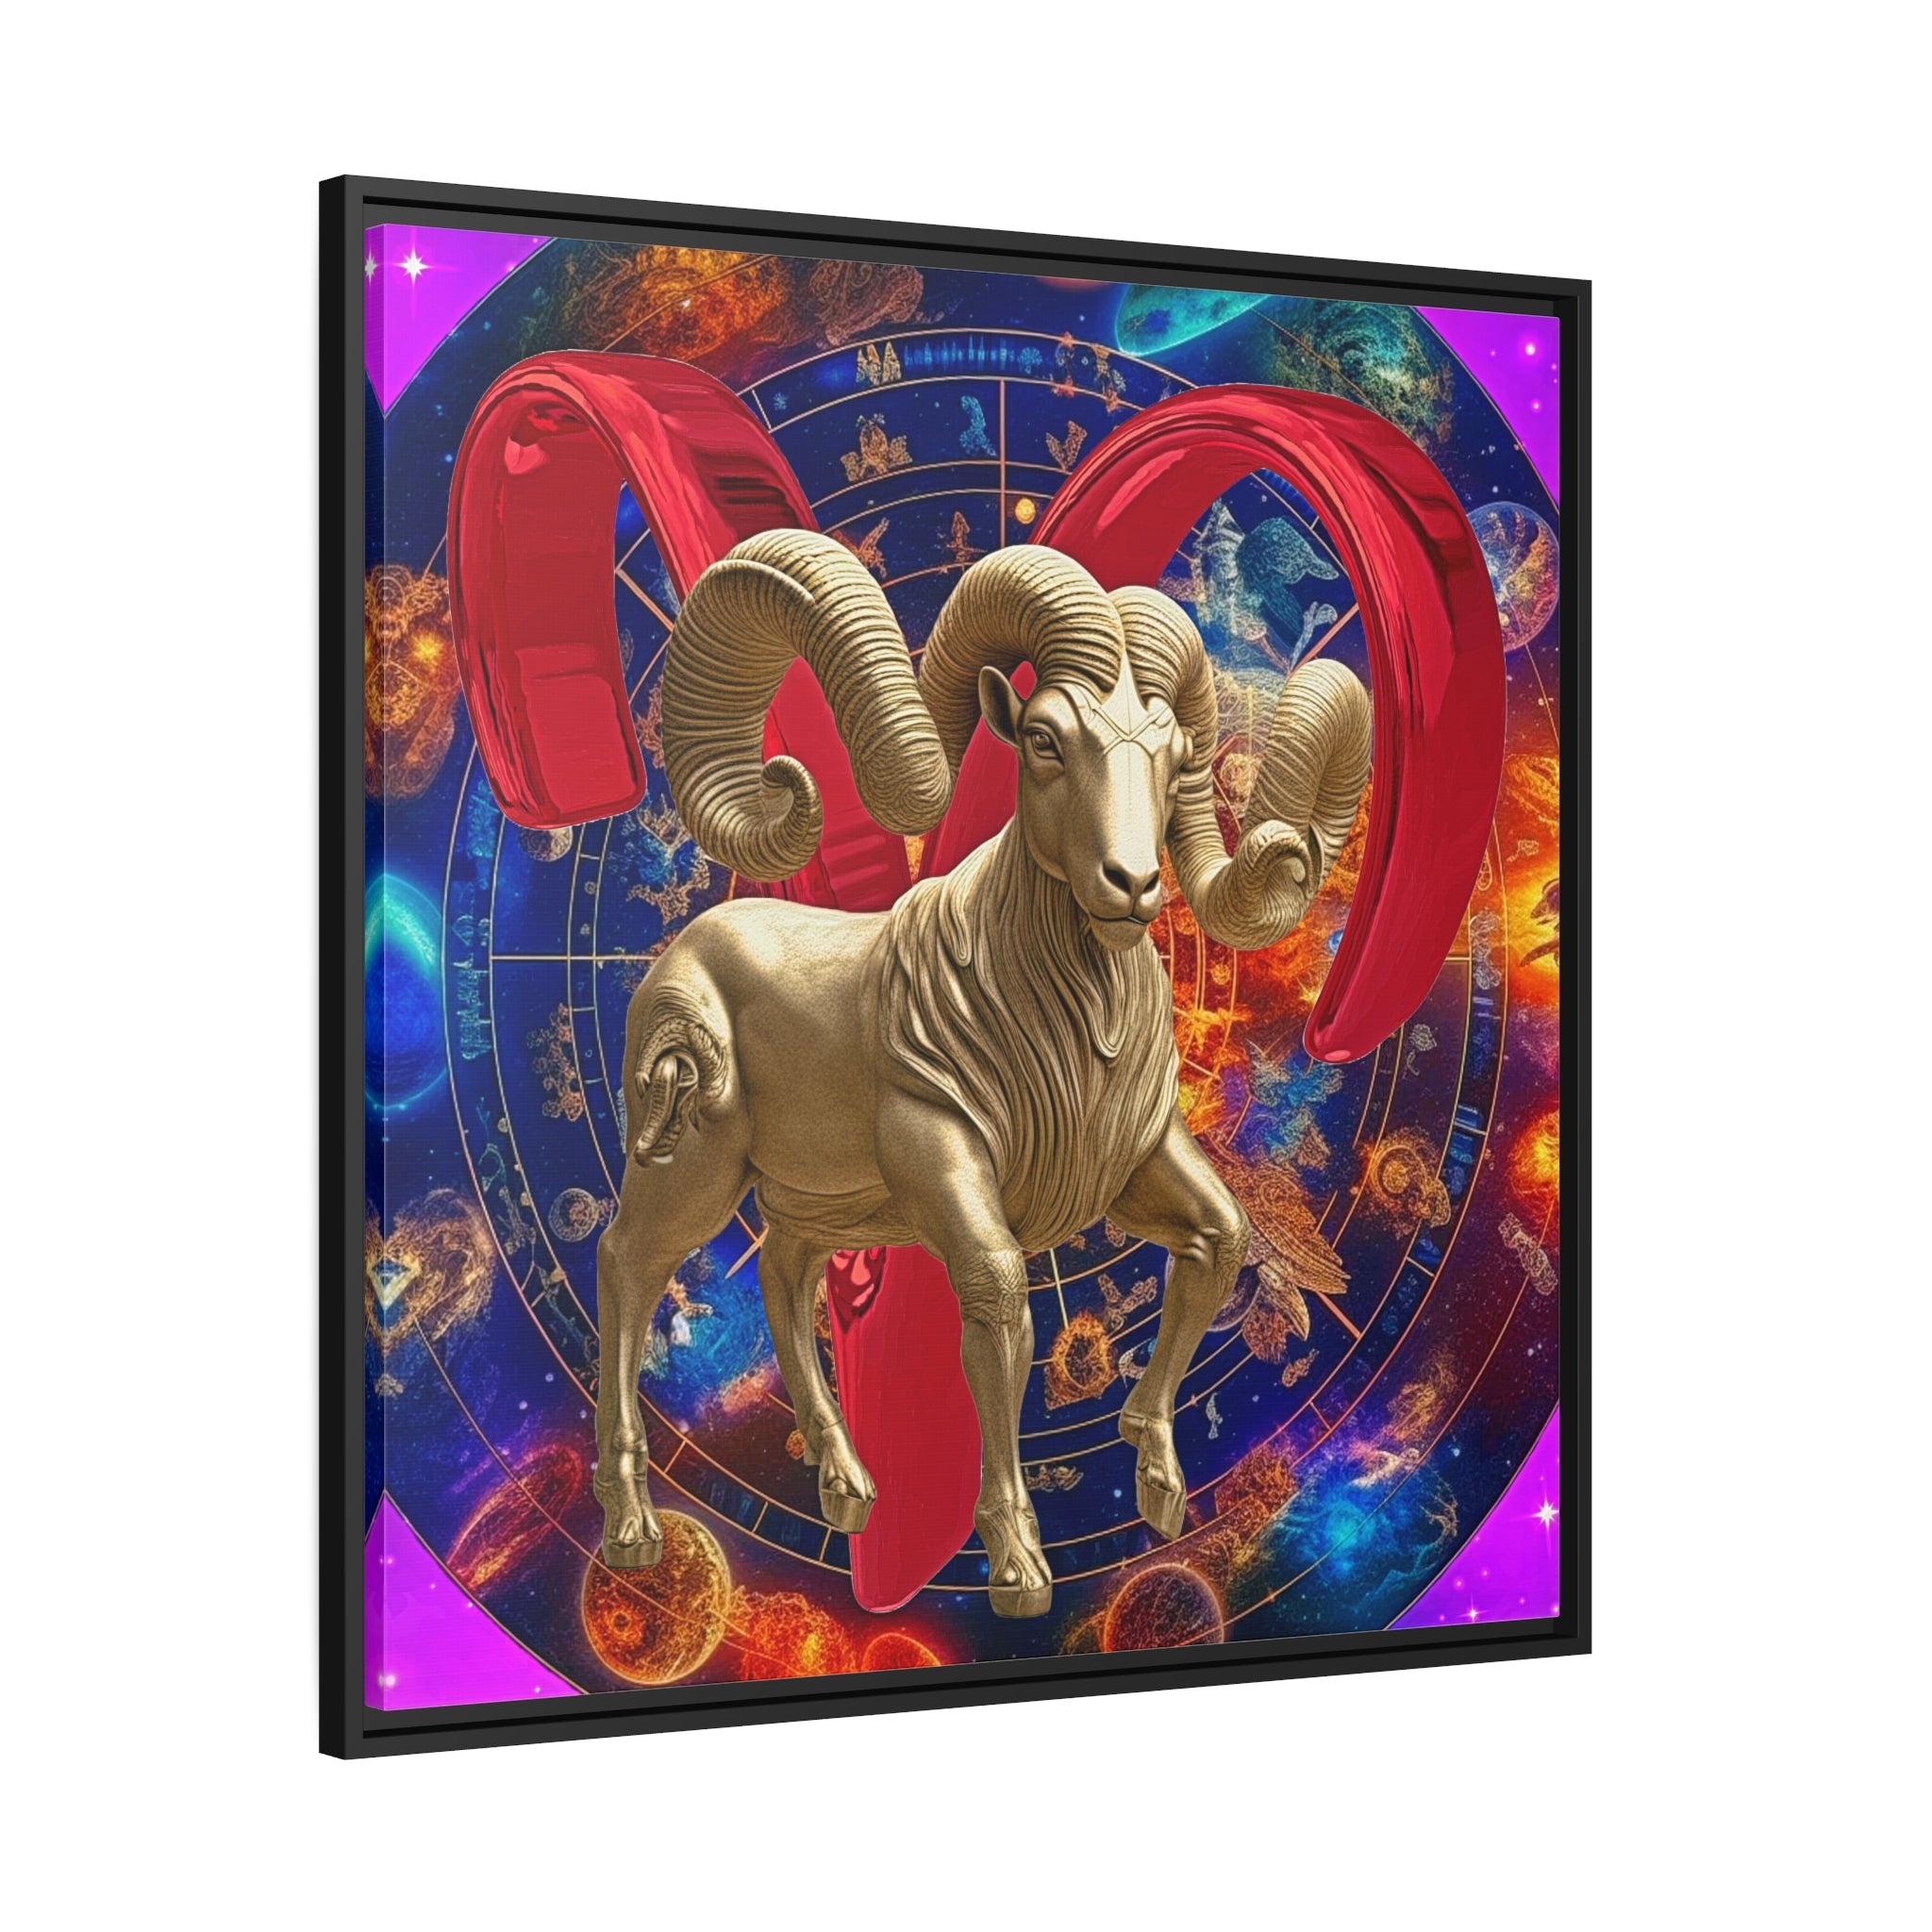 Wall Art ARIES ZODIAC SIGN  Canvas Art Print Painting 32x32 + Frame Study Celestial Design Sun Moon Star Bodies Chart Wall Decor House Home Office Gift Ready to Hang